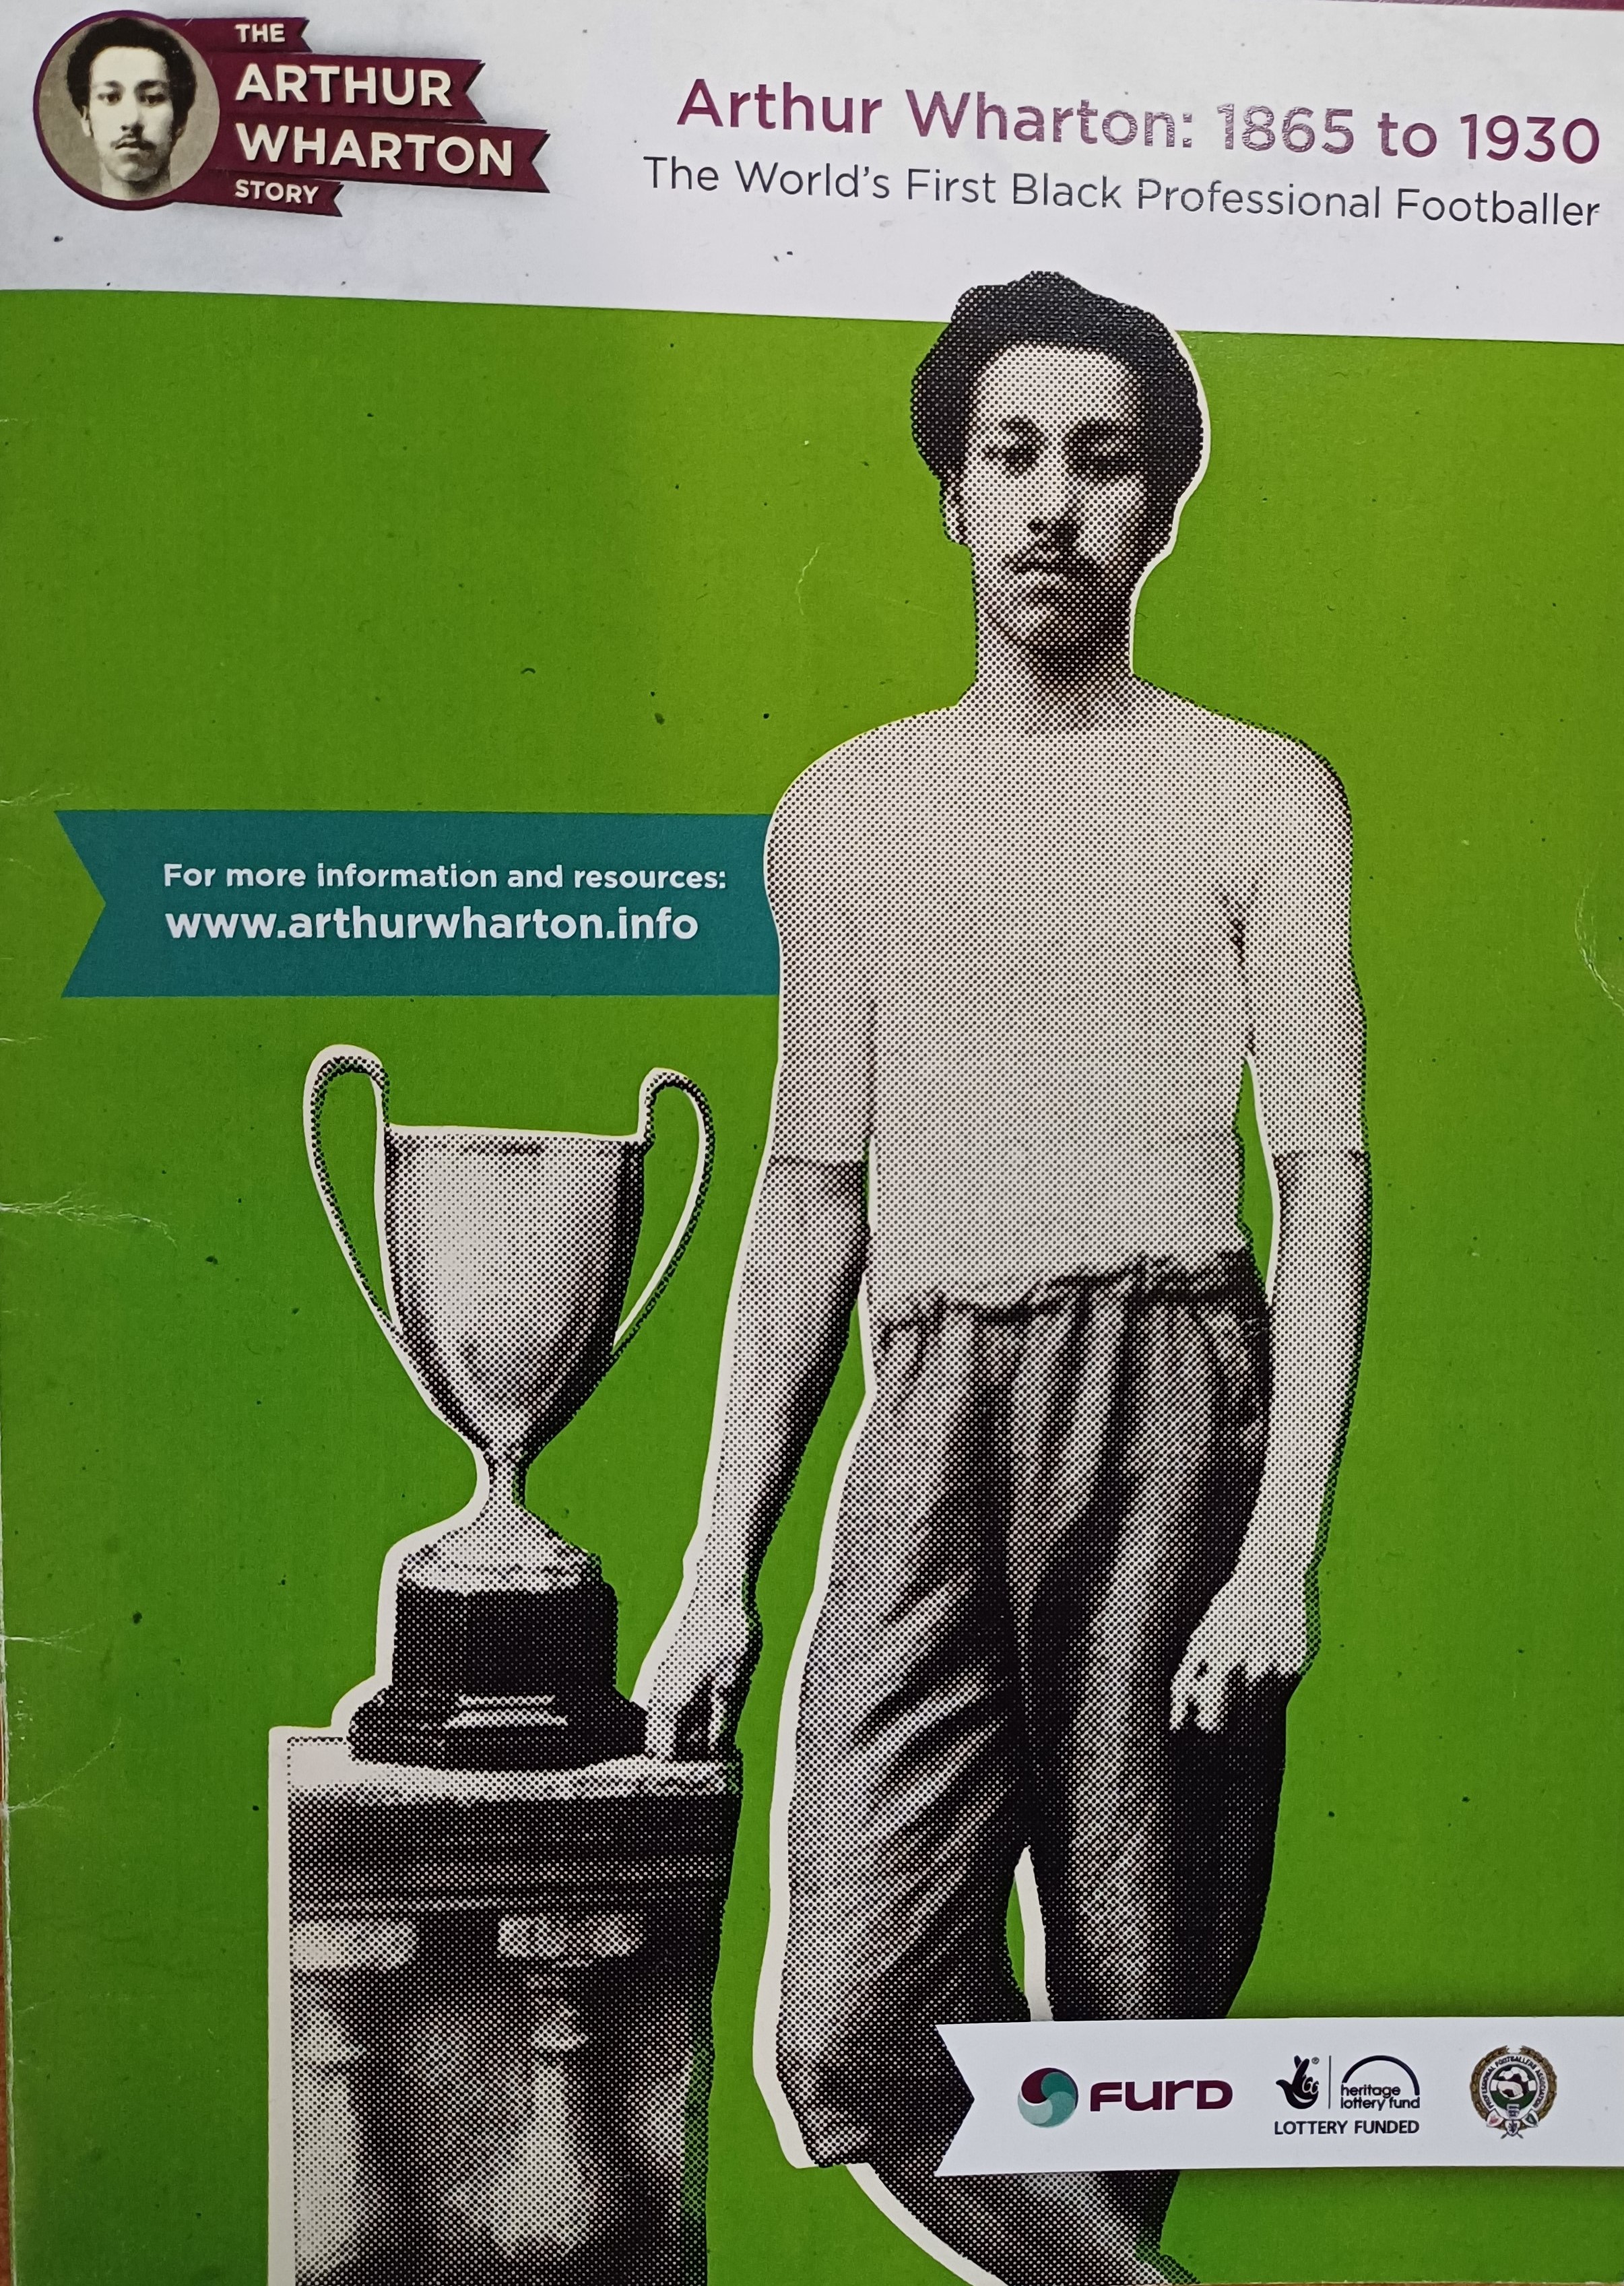 The Arthur Wharton Story booklet cover - The Arthur Wharton Story booklet cover